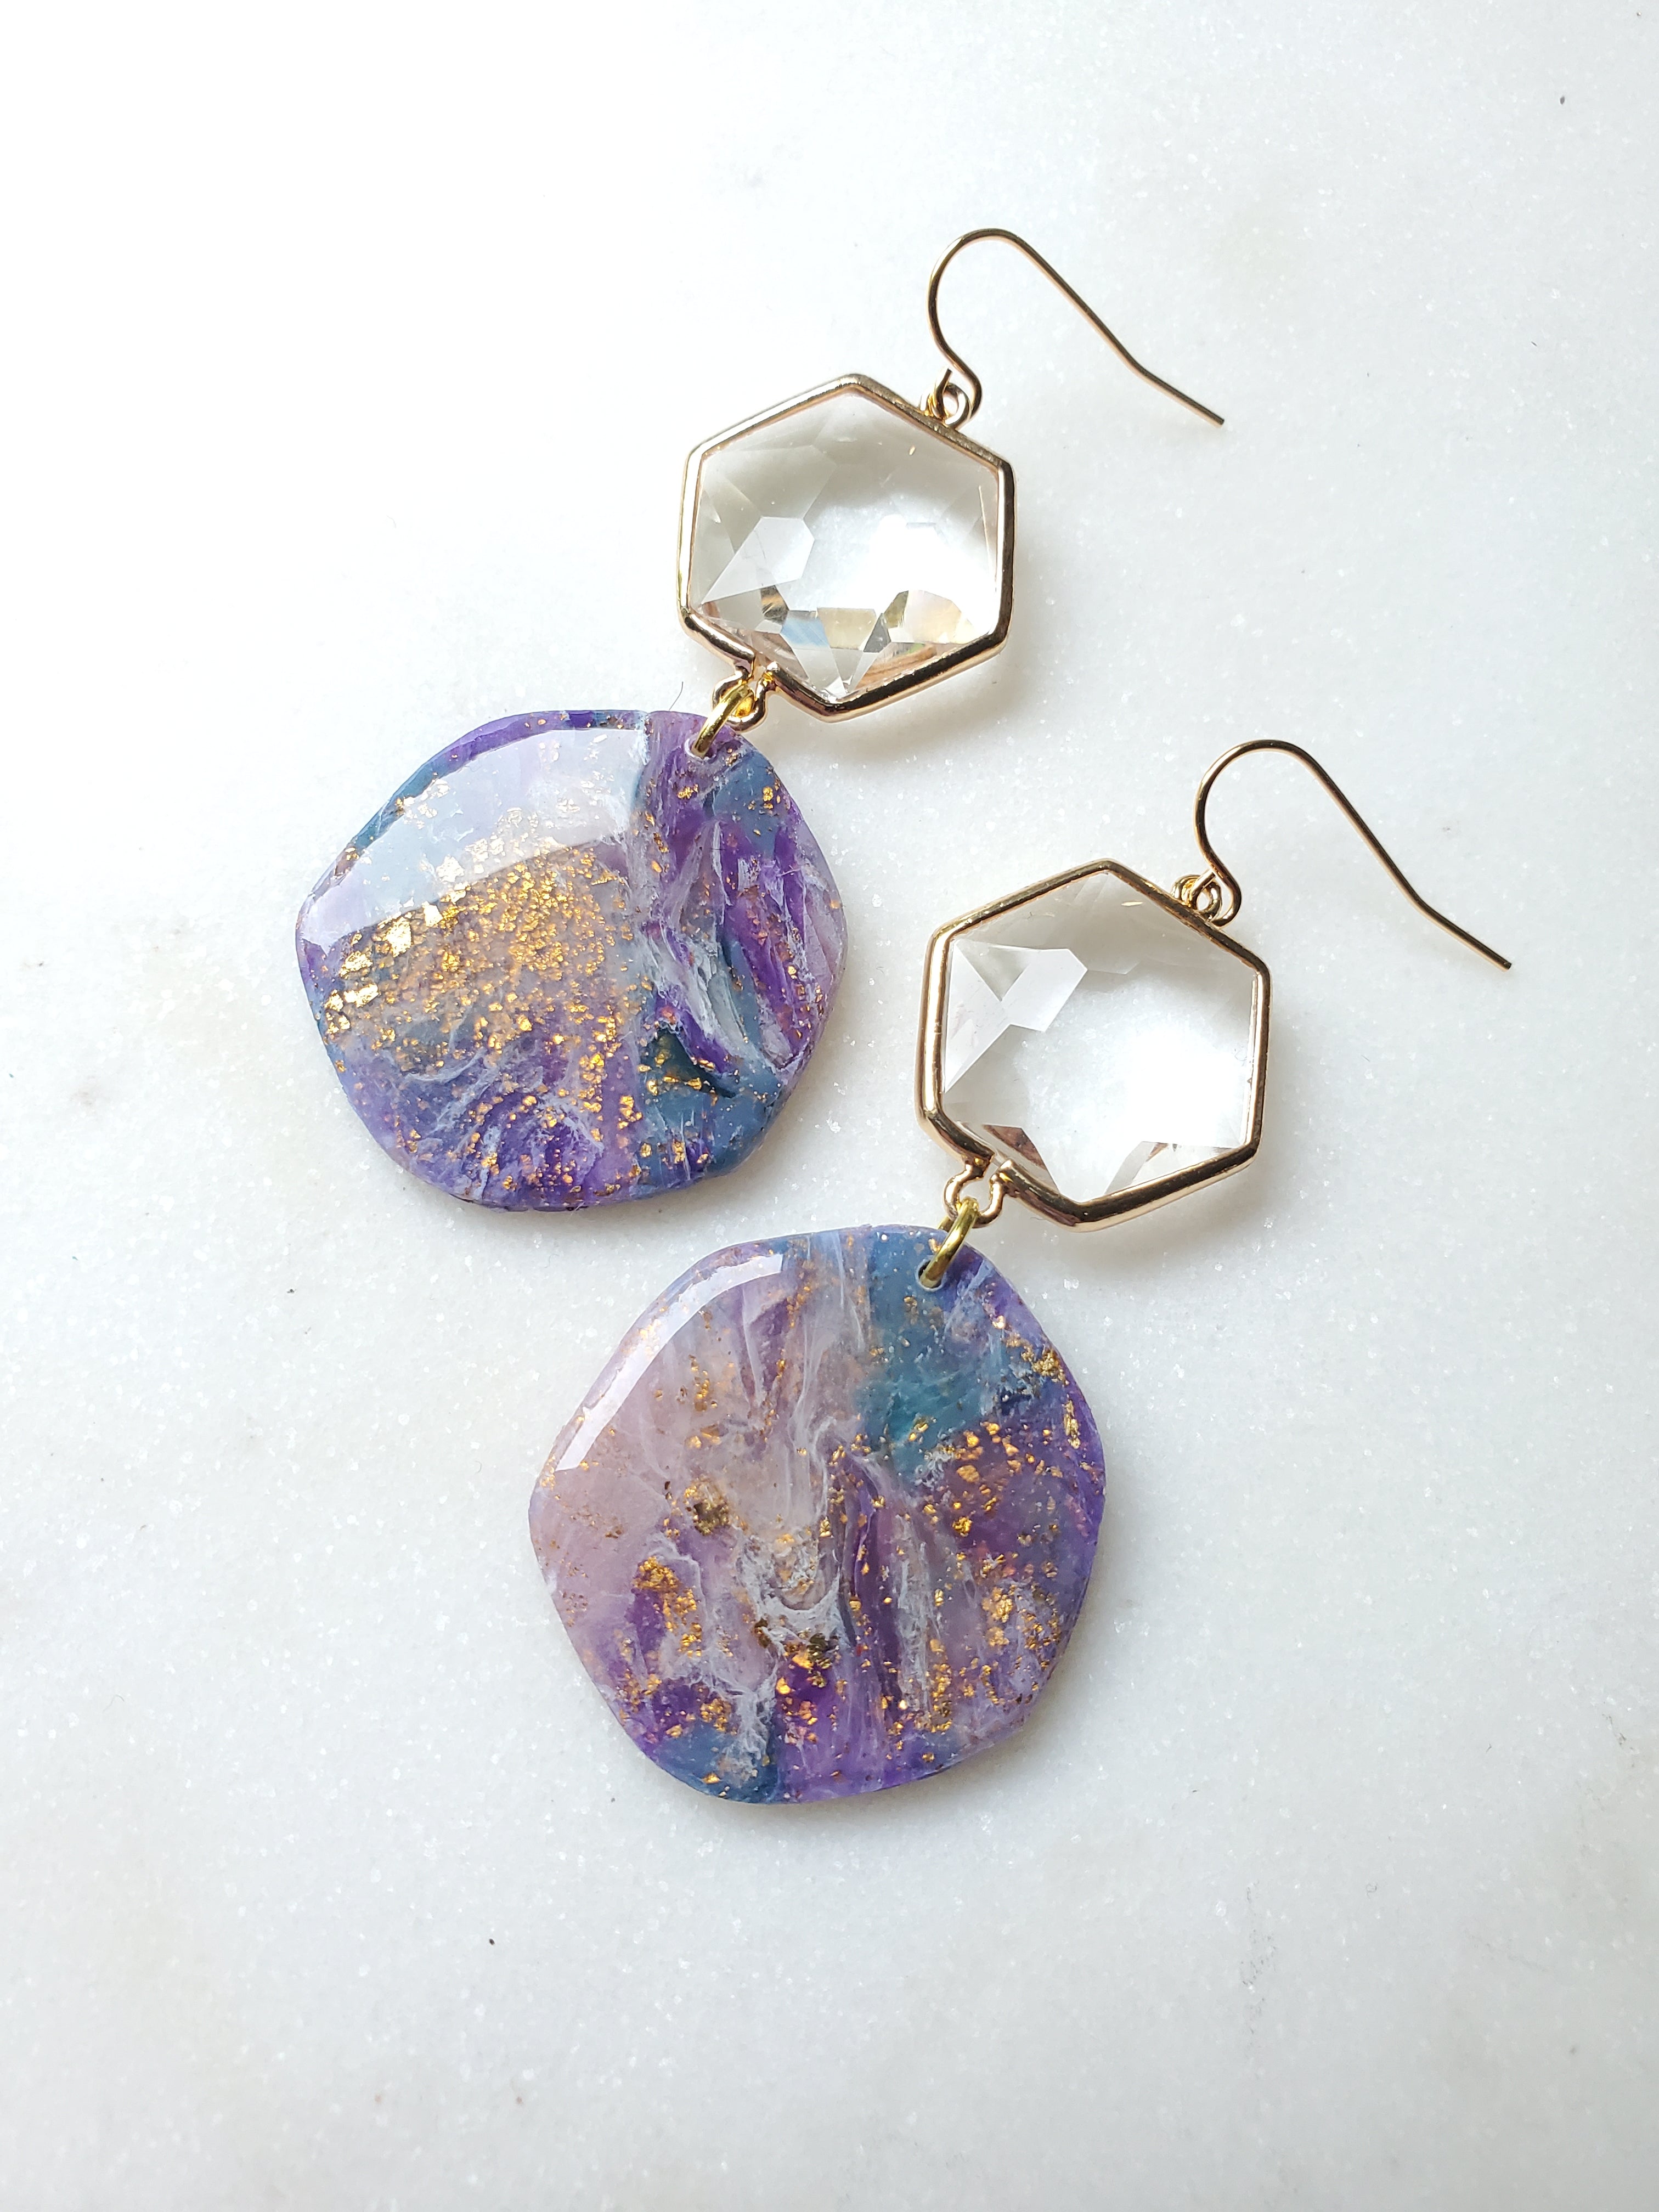 14K Gold Filled Agate Inspired Glass Statement Earrings - Purple/Blue